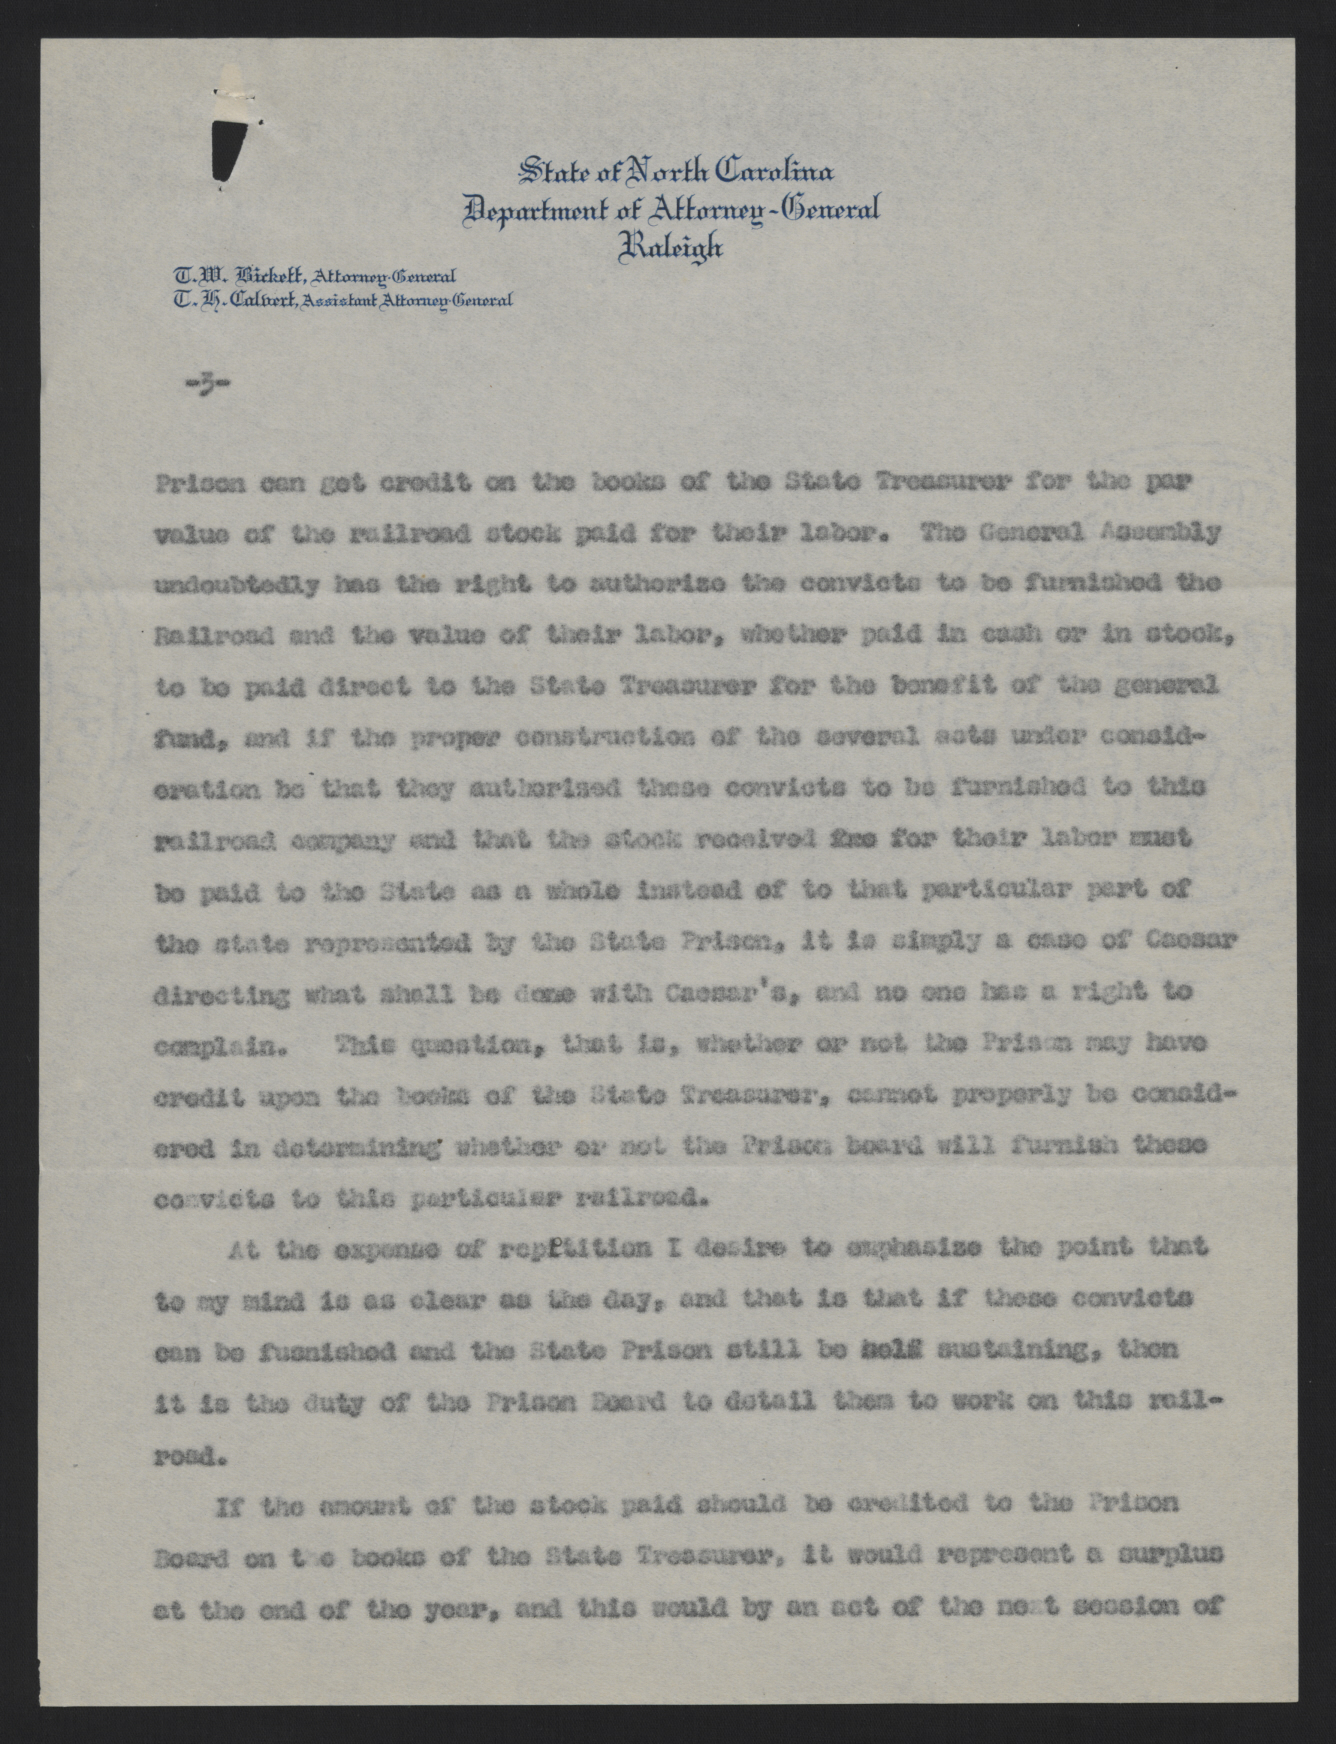 Letter from Bickett to Varner and Lacy, June 10, 1915, page 3